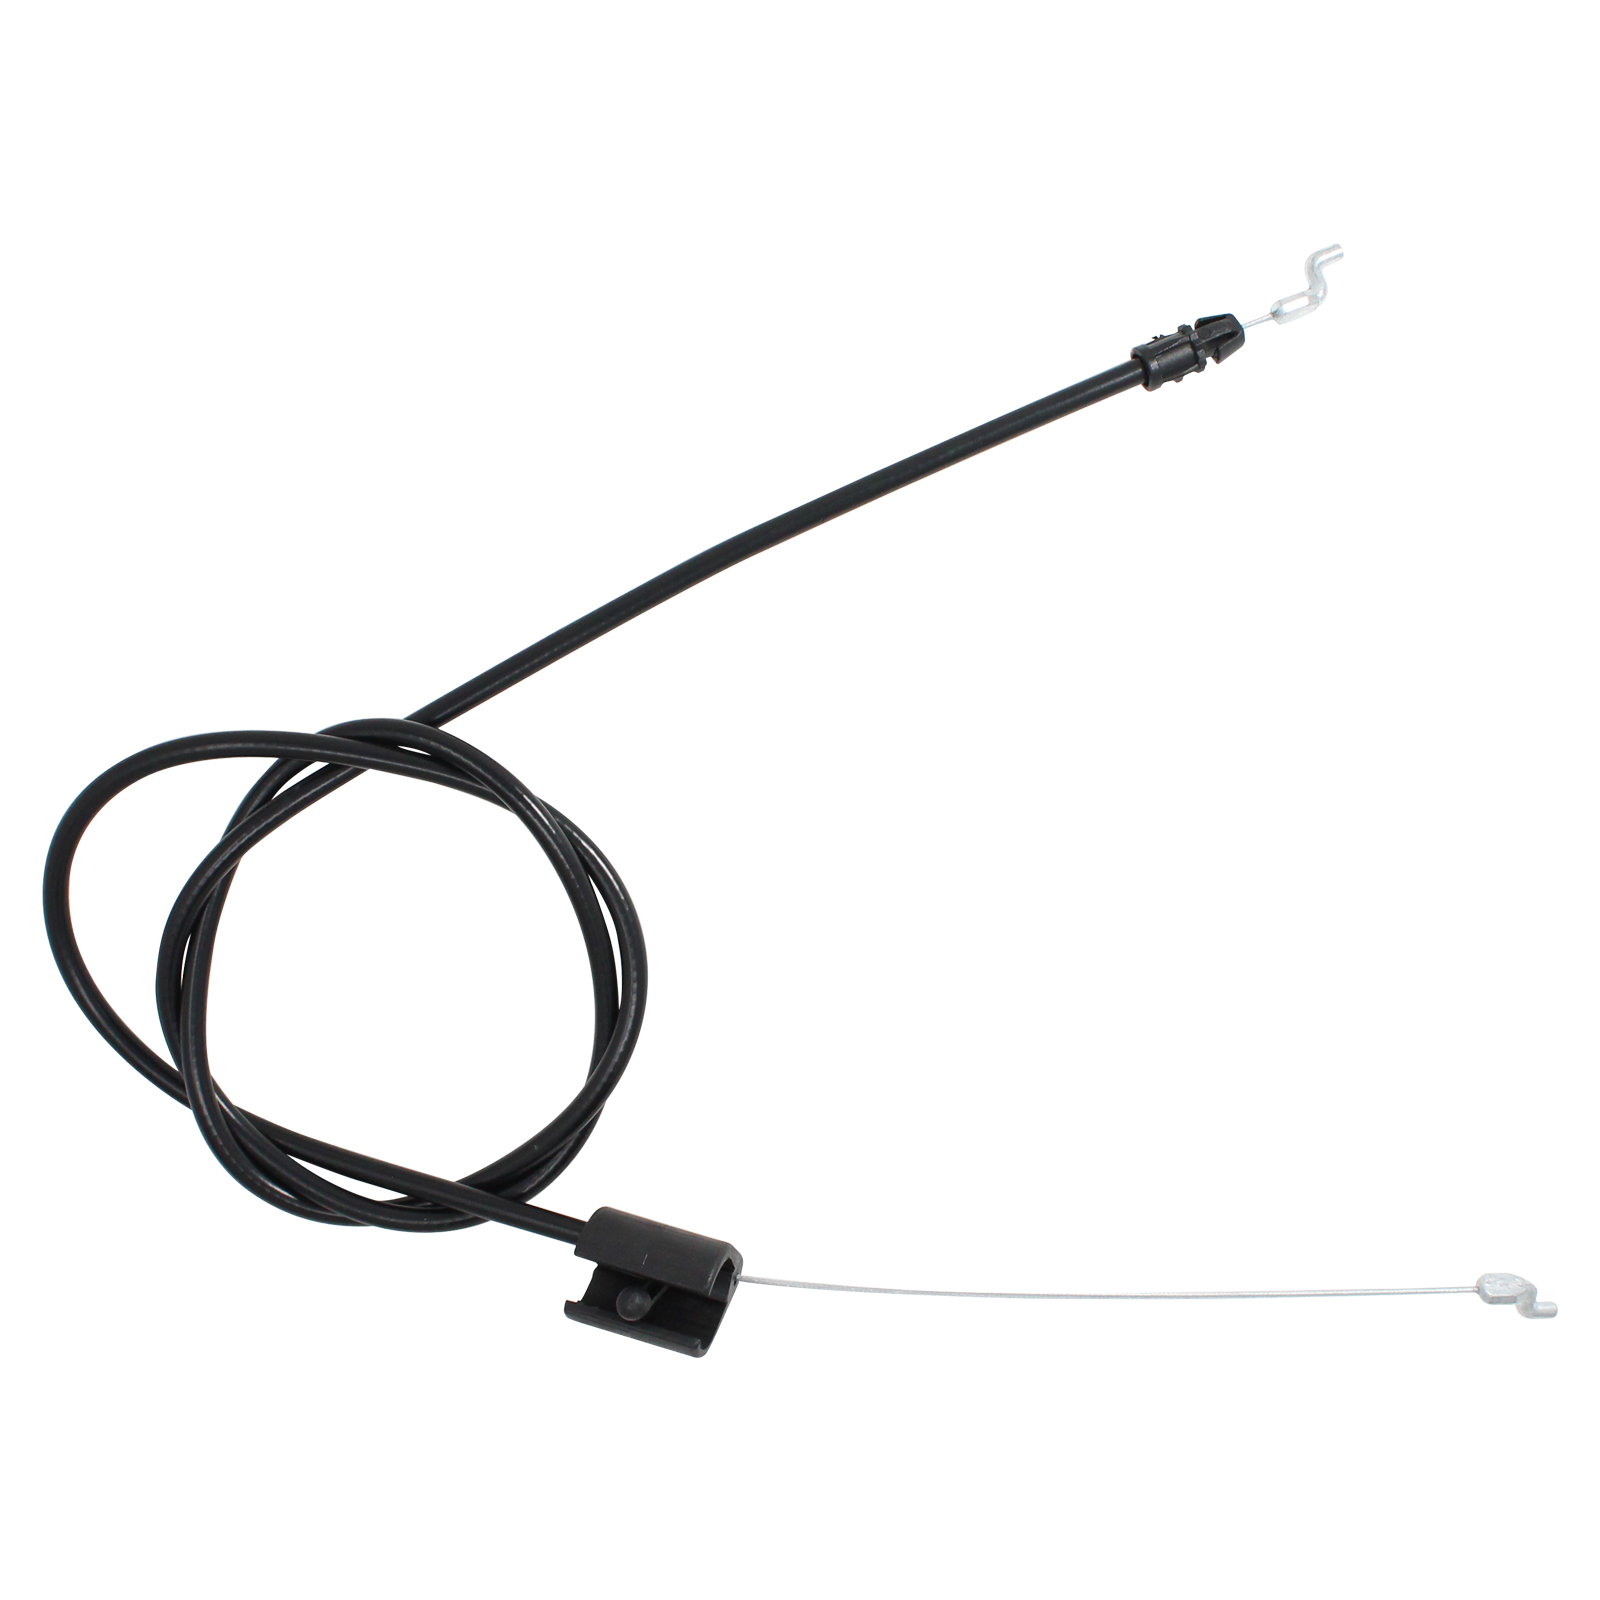 532176556 Engine Cable Replacement for Husqvarna ROTARY LAWN MOWER (96114000719) (2007-11) Lawn Mower: Consumer Walk Behind - Compatible with 176556 162778 Zone Control Cable - image 4 of 4